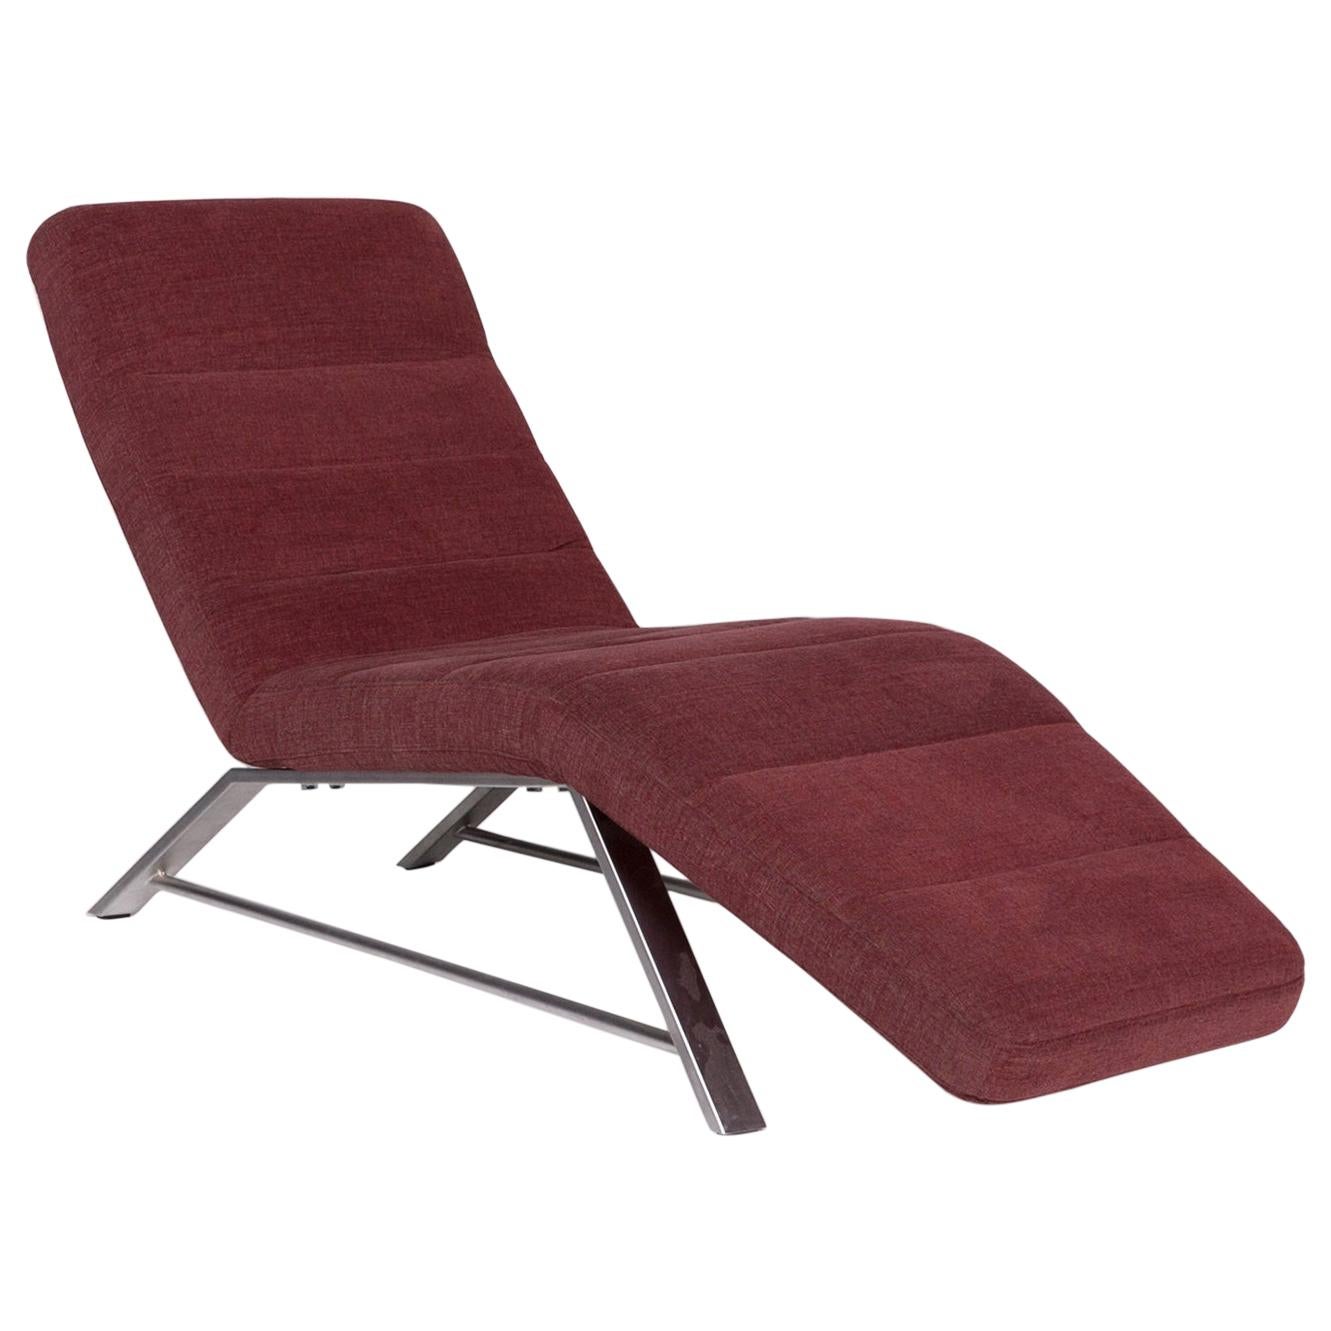 Willi Schillig Fabric Lounger Red Wine Red Relax Function For Sale